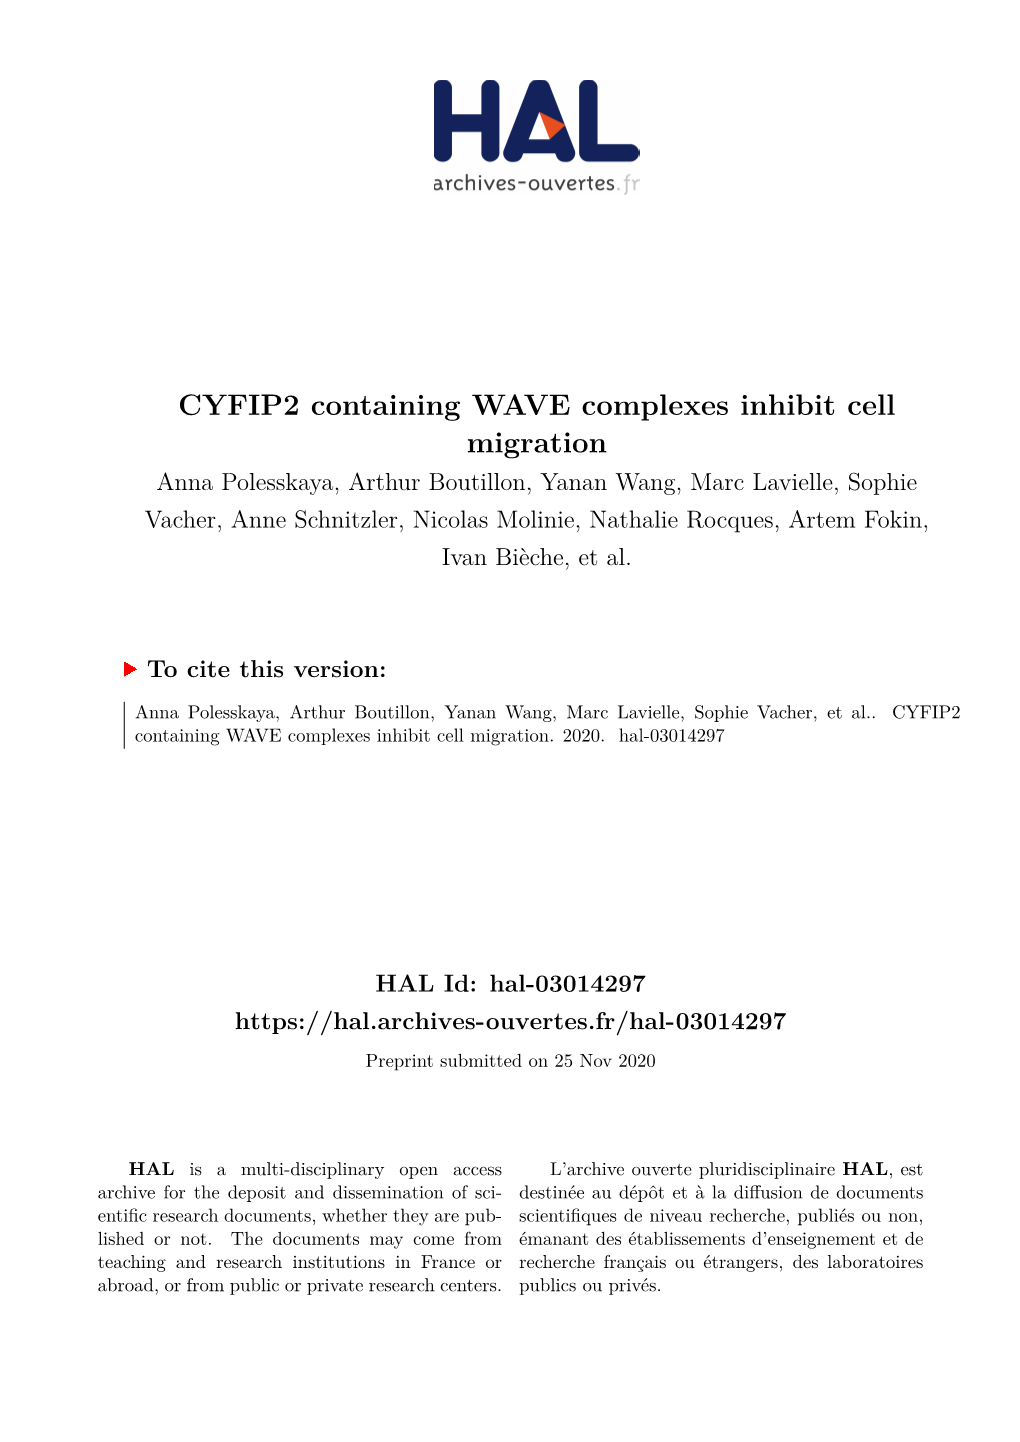 CYFIP2 Containing WAVE Complexes Inhibit Cell Migration